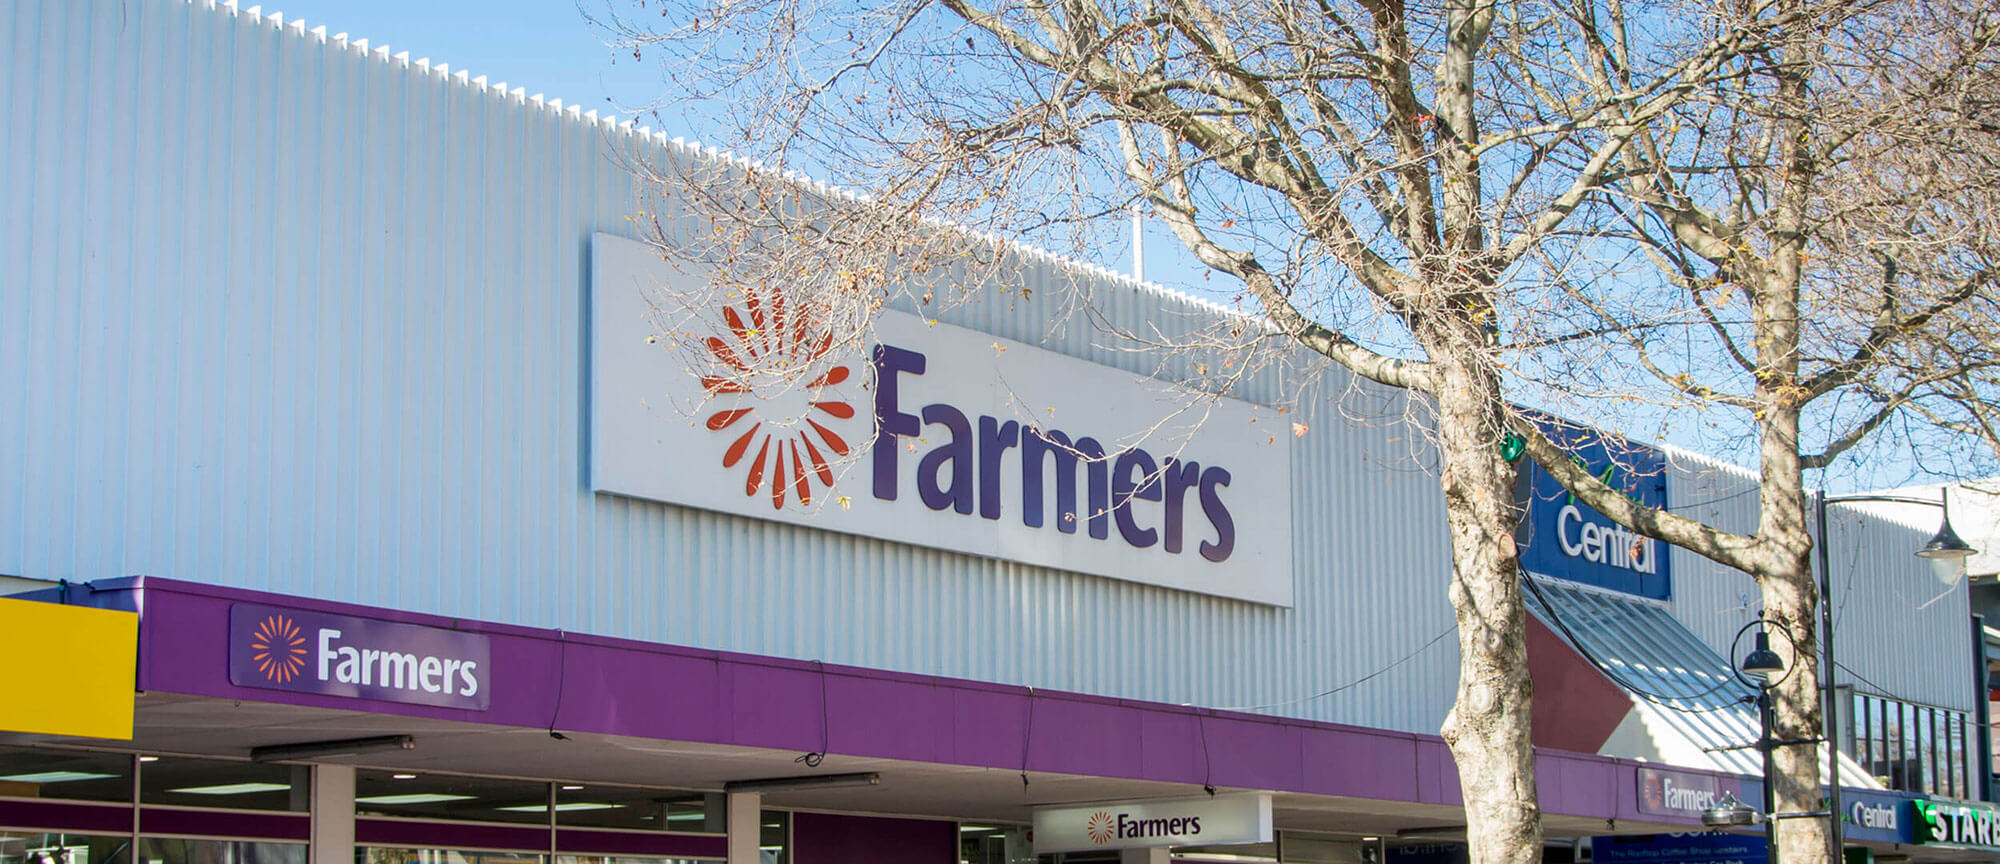 Retail store Farmers street signage in Nelson